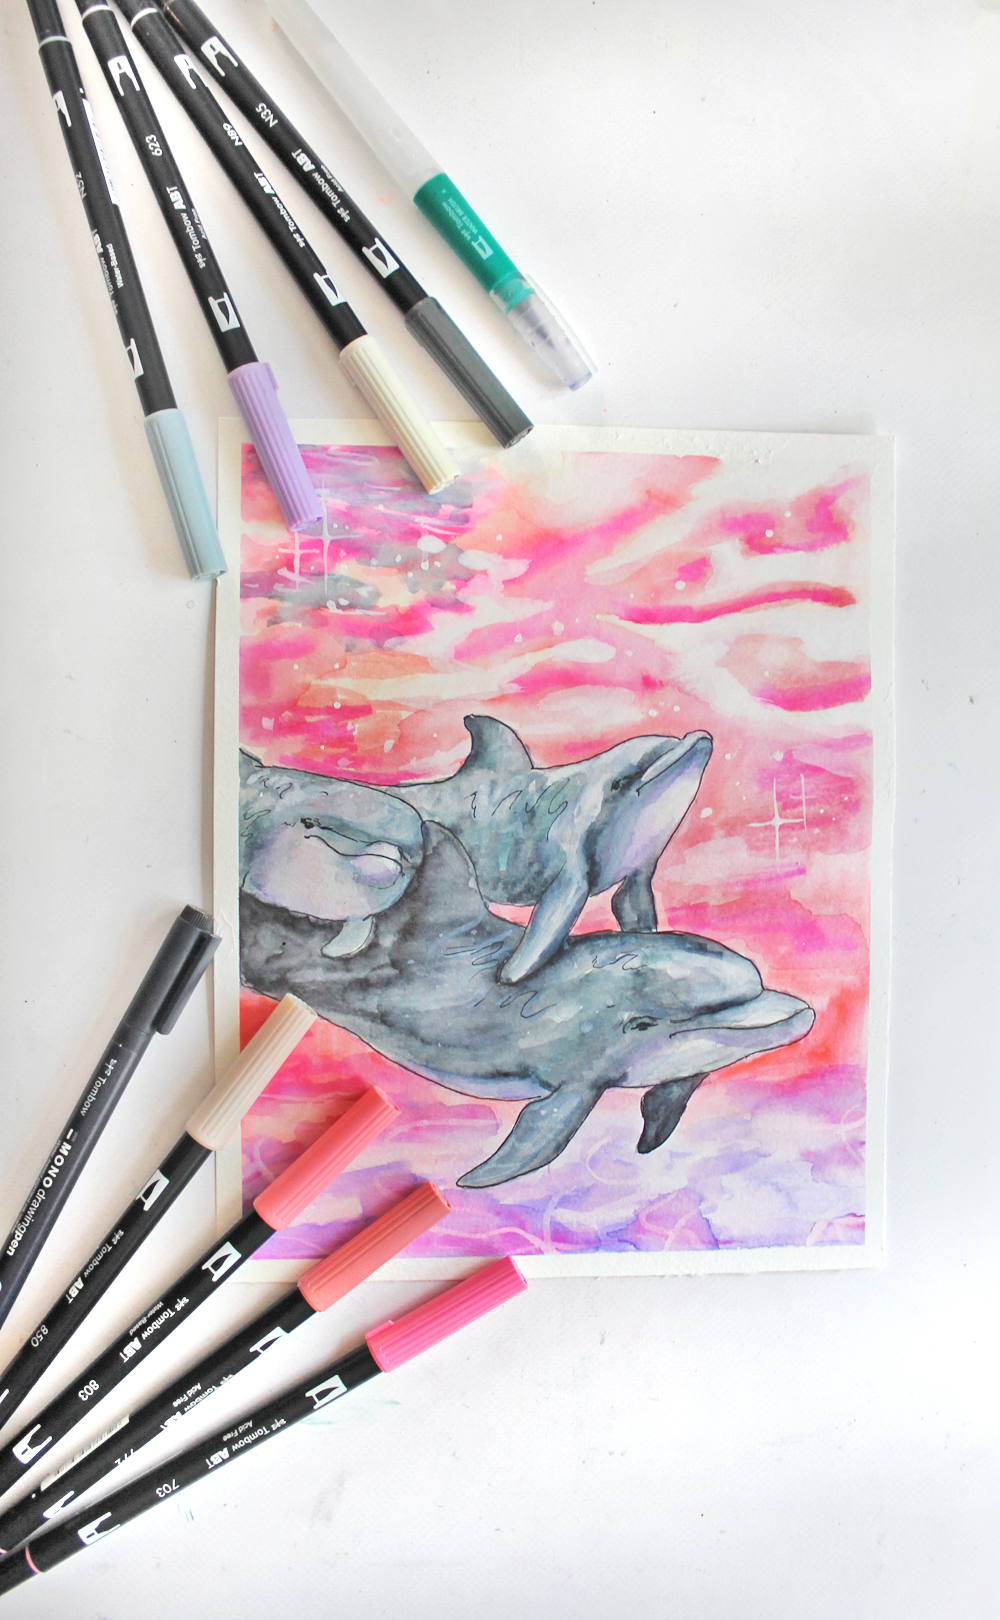 The Best Ways to Use Watercolor Brush Pens - Beebly's Watercolor Painting